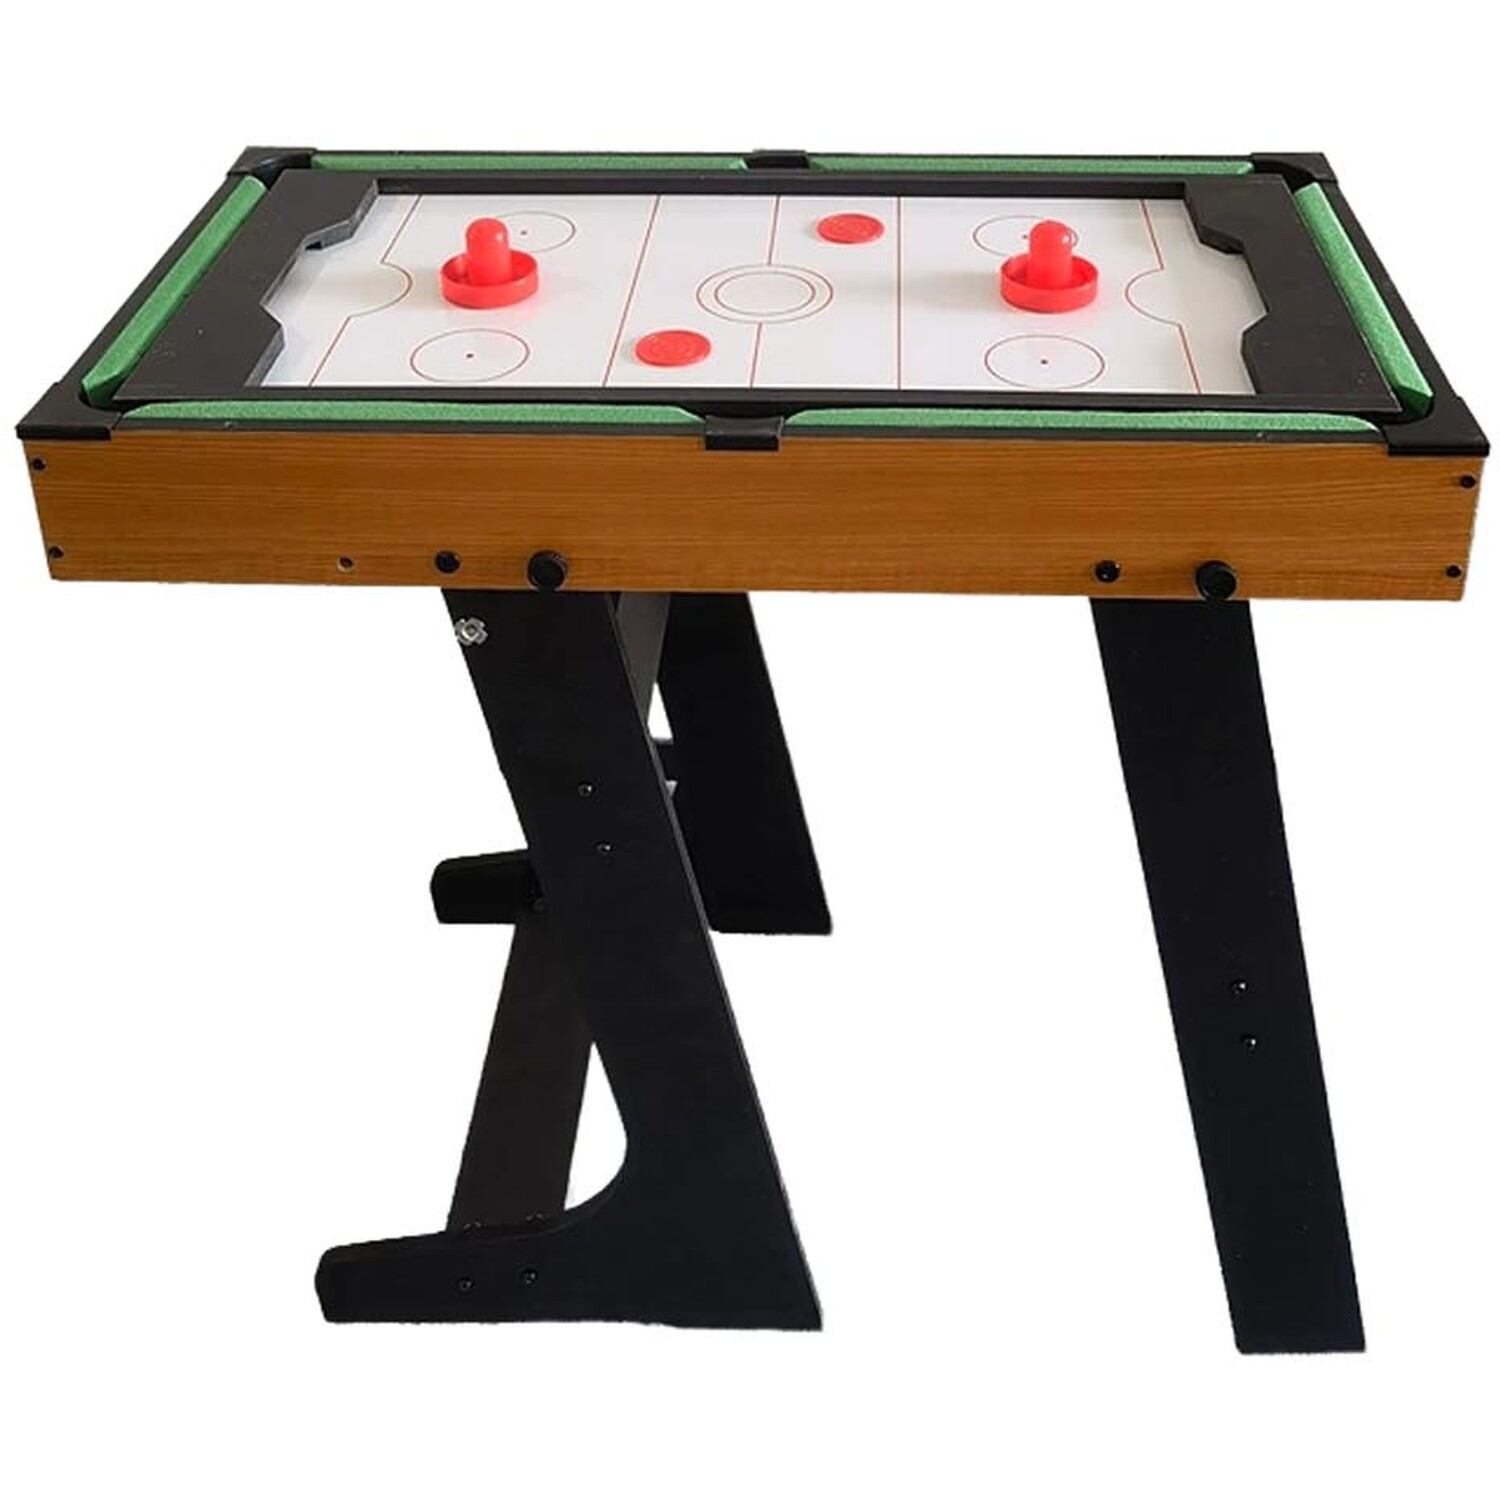 3-in-1 Games Table - Brown Image 2